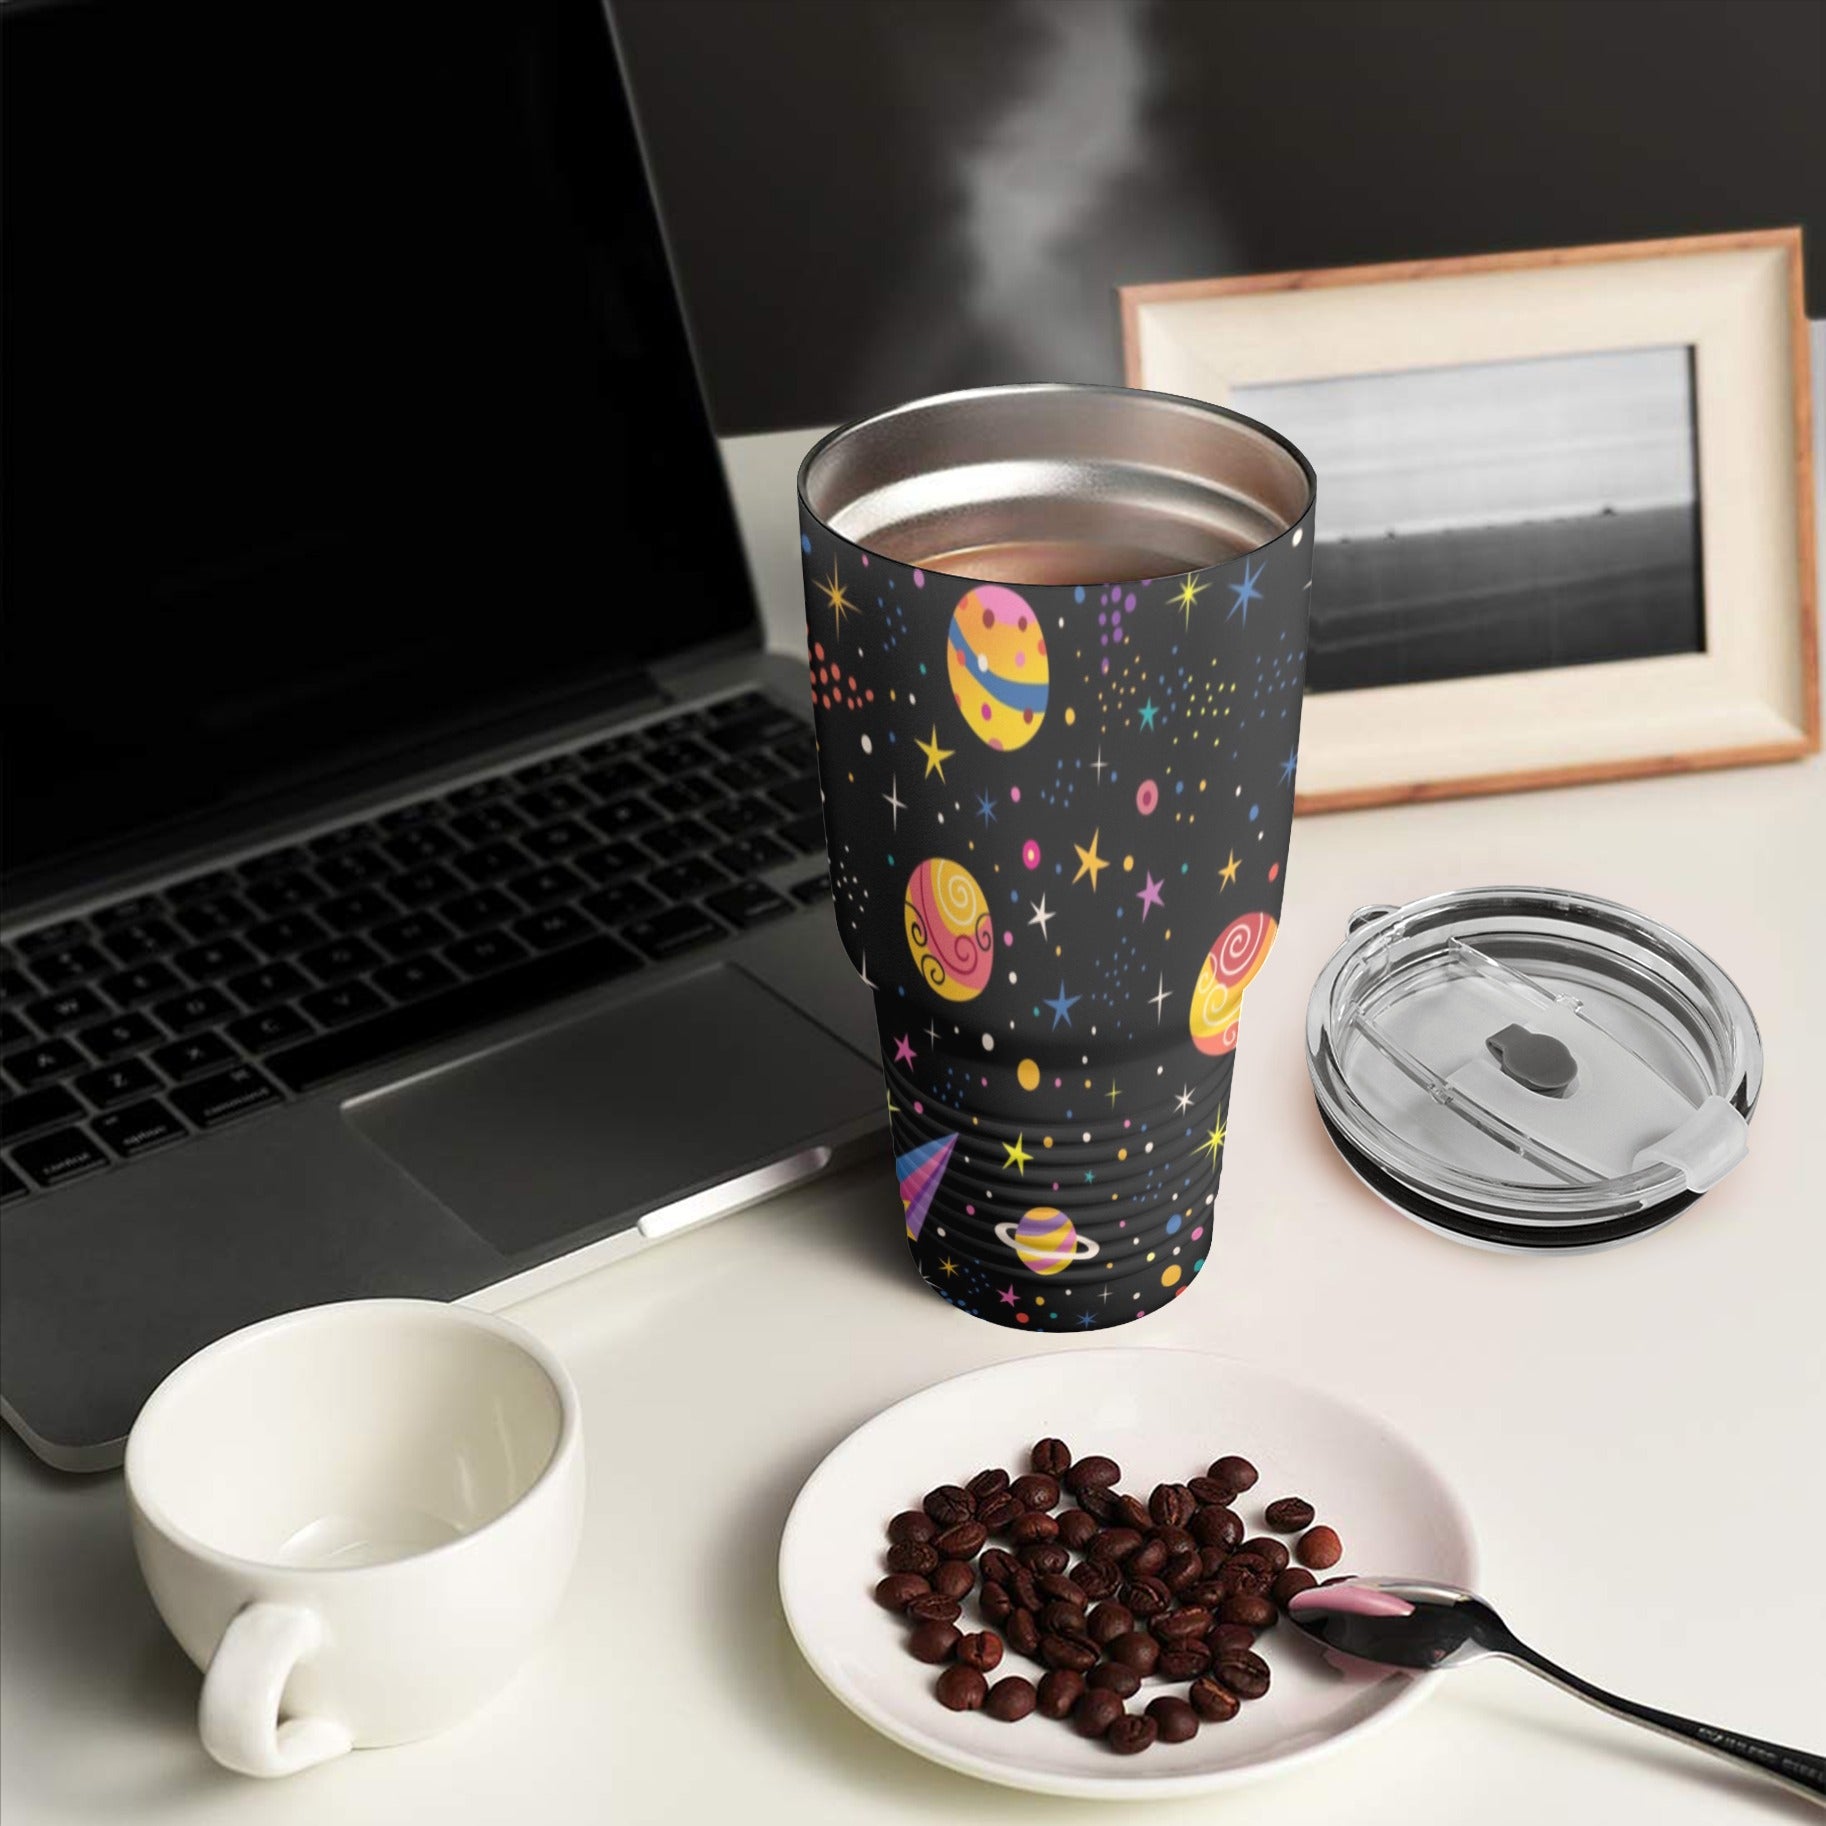 Colourful Space - 30oz Insulated Stainless Steel Mobile Tumbler 30oz Insulated Stainless Steel Mobile Tumbler Space